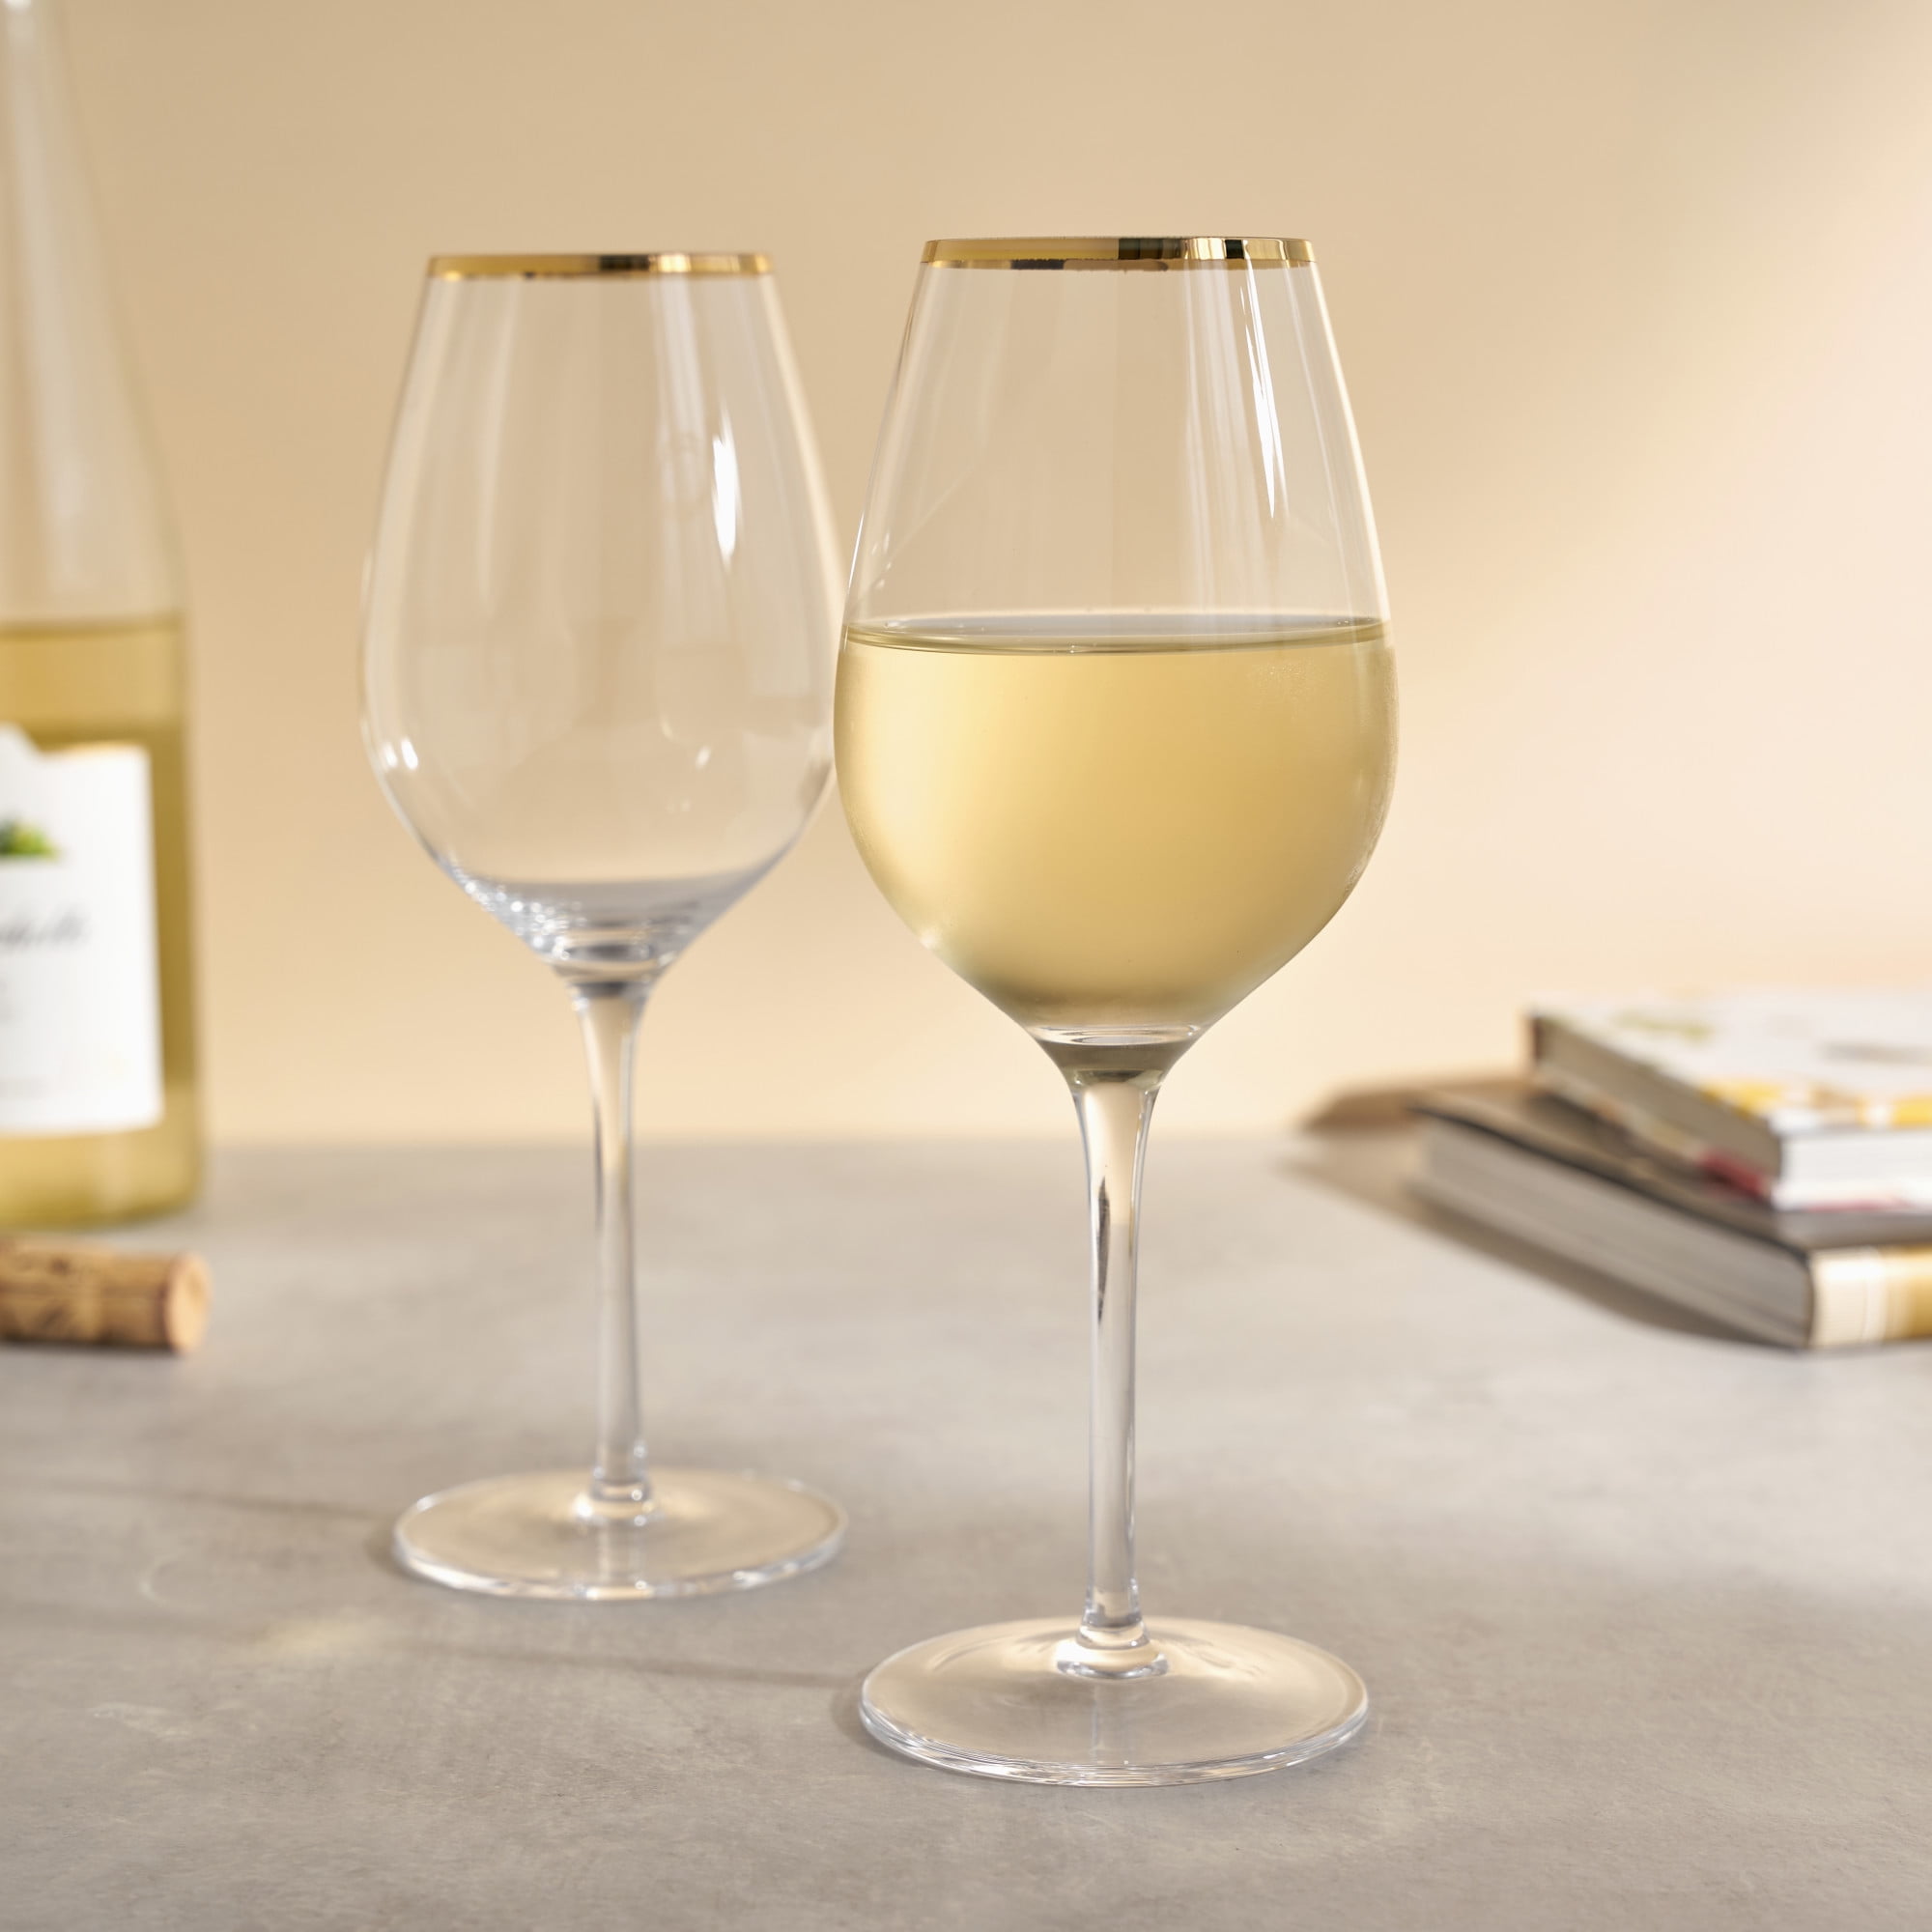 Vinglacé Wine Sets with Glass Lined Wine Glasses